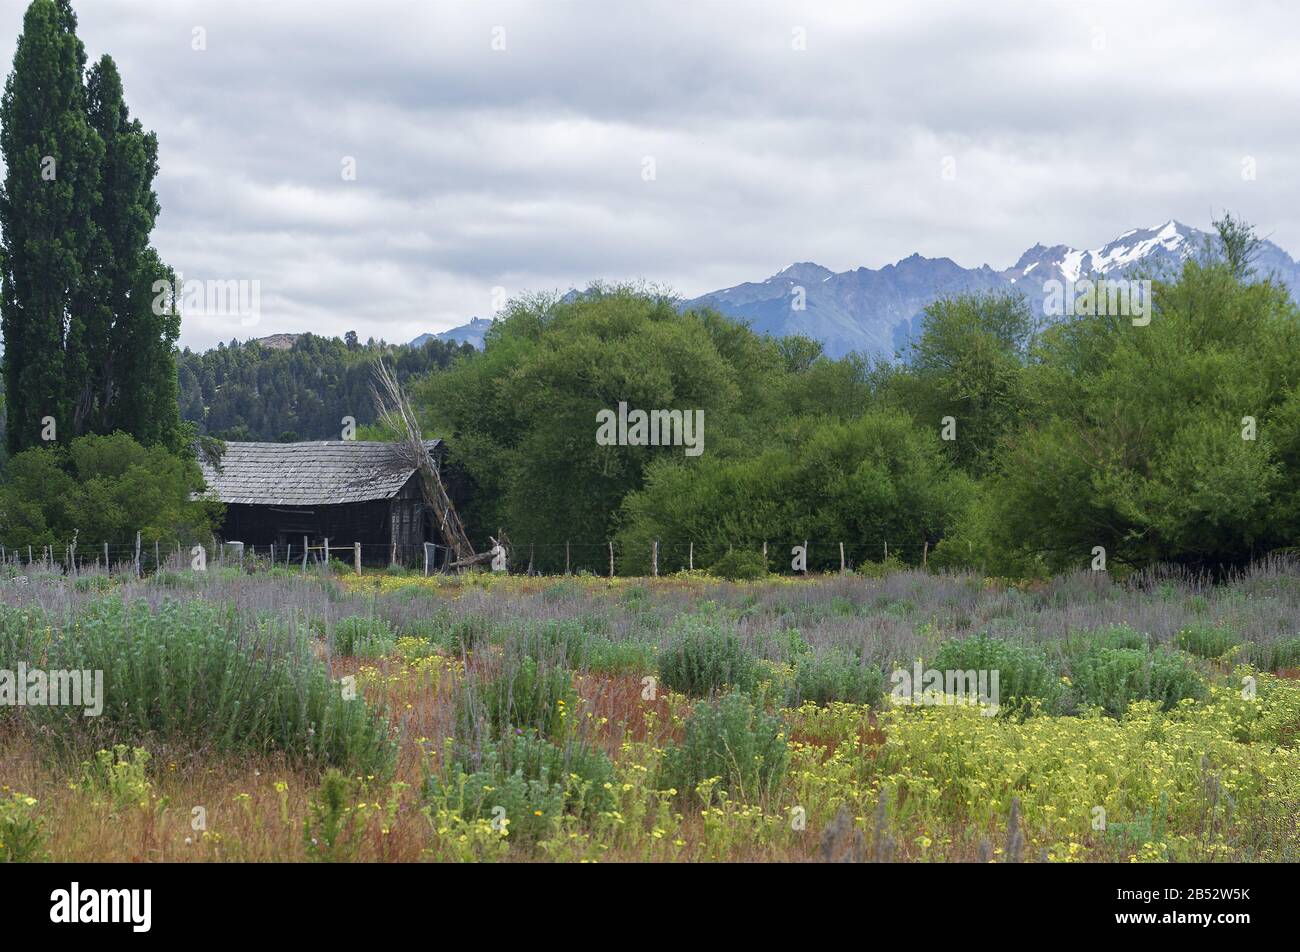 An old wooden barn near Butch Cassidy's home in Cholila, Patagonia Argentina Stock Photo